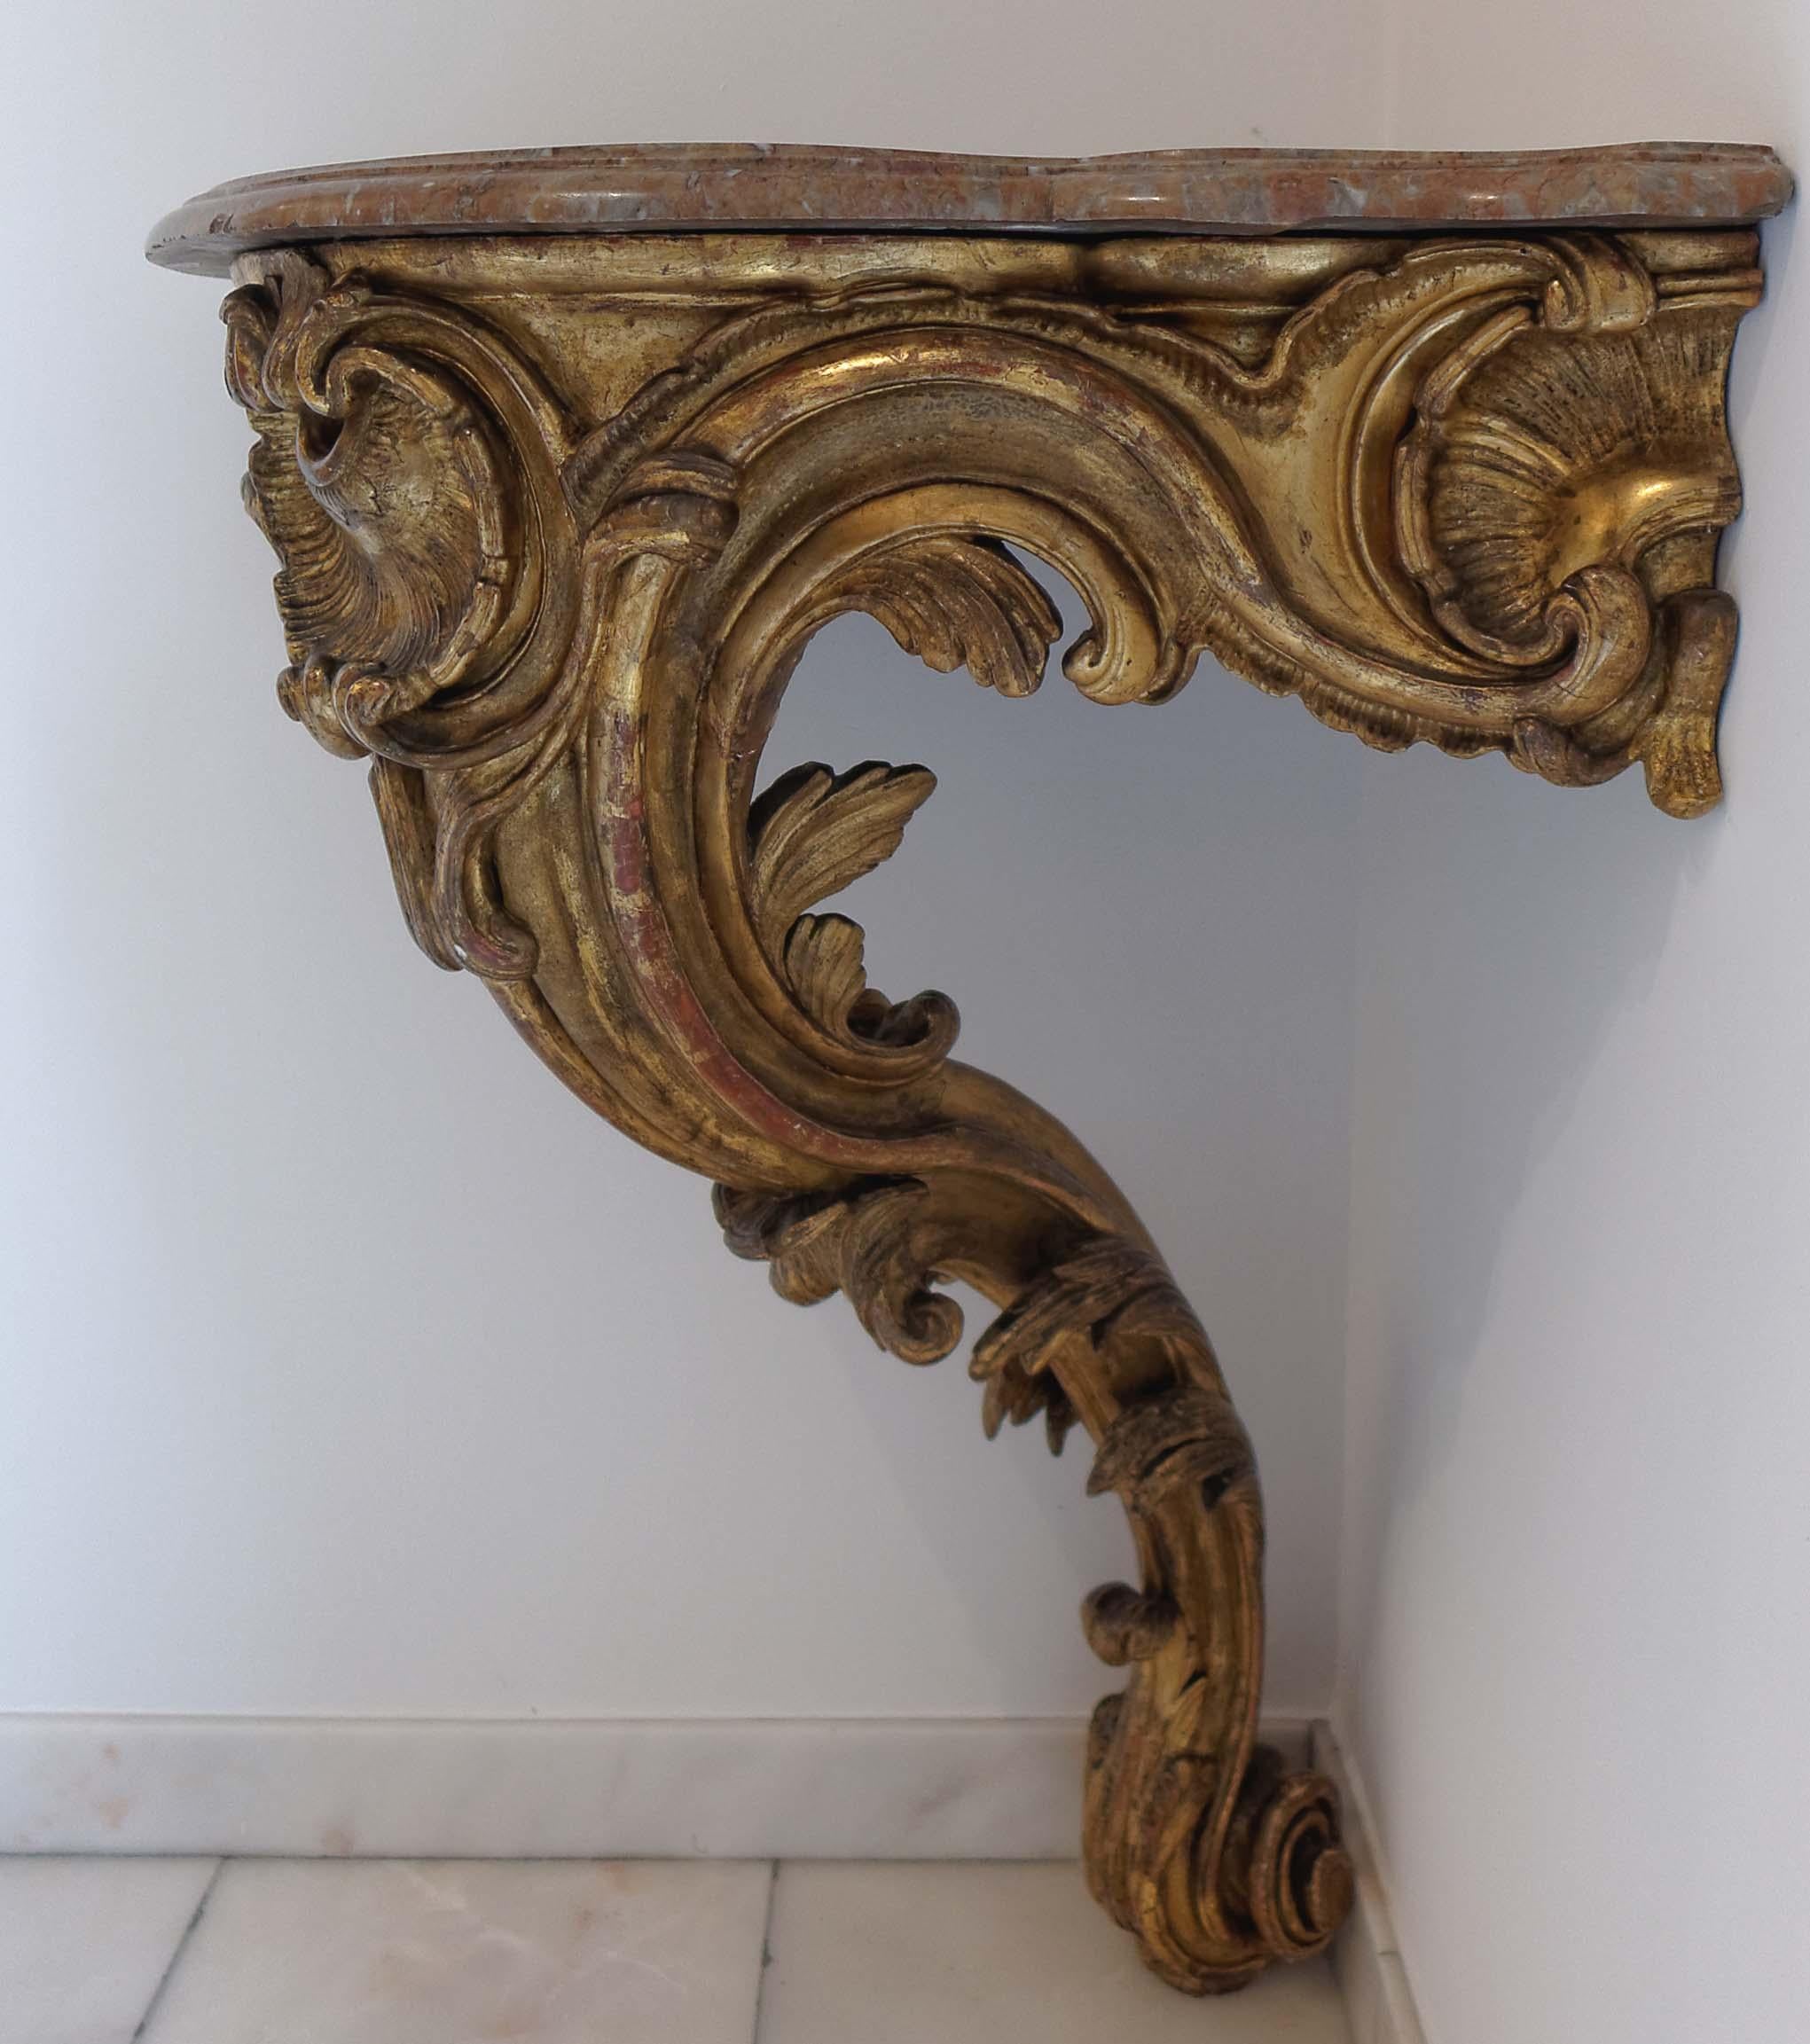 A very fine French Louis XV mid-18th century giltwood corner console table. Carved throughout with C-scrolls and foliage on a central leg terminating in a scrolling foot. Original moulded marble-top.